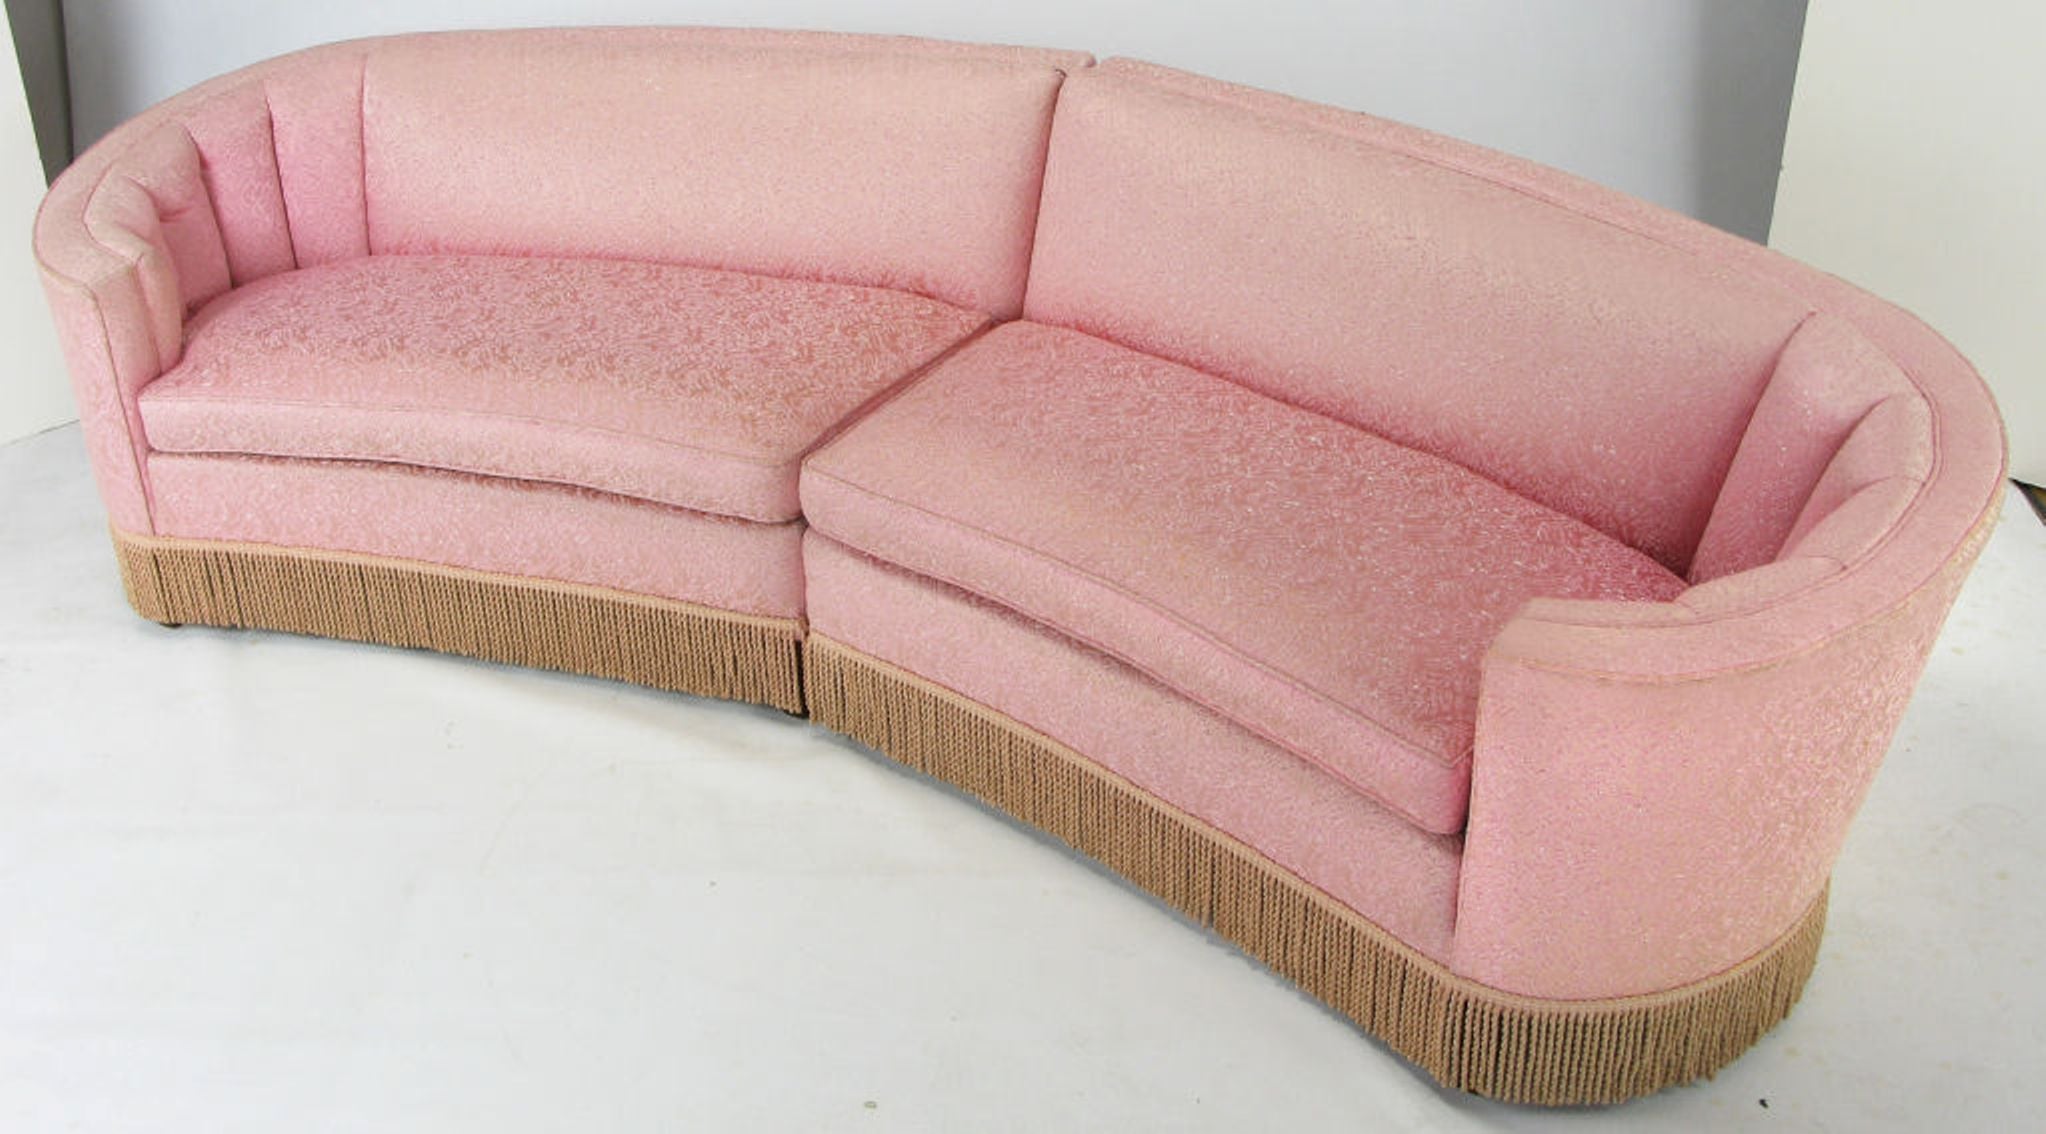 1940s Curved Sectional Sofa In Pink Damask Upholstery